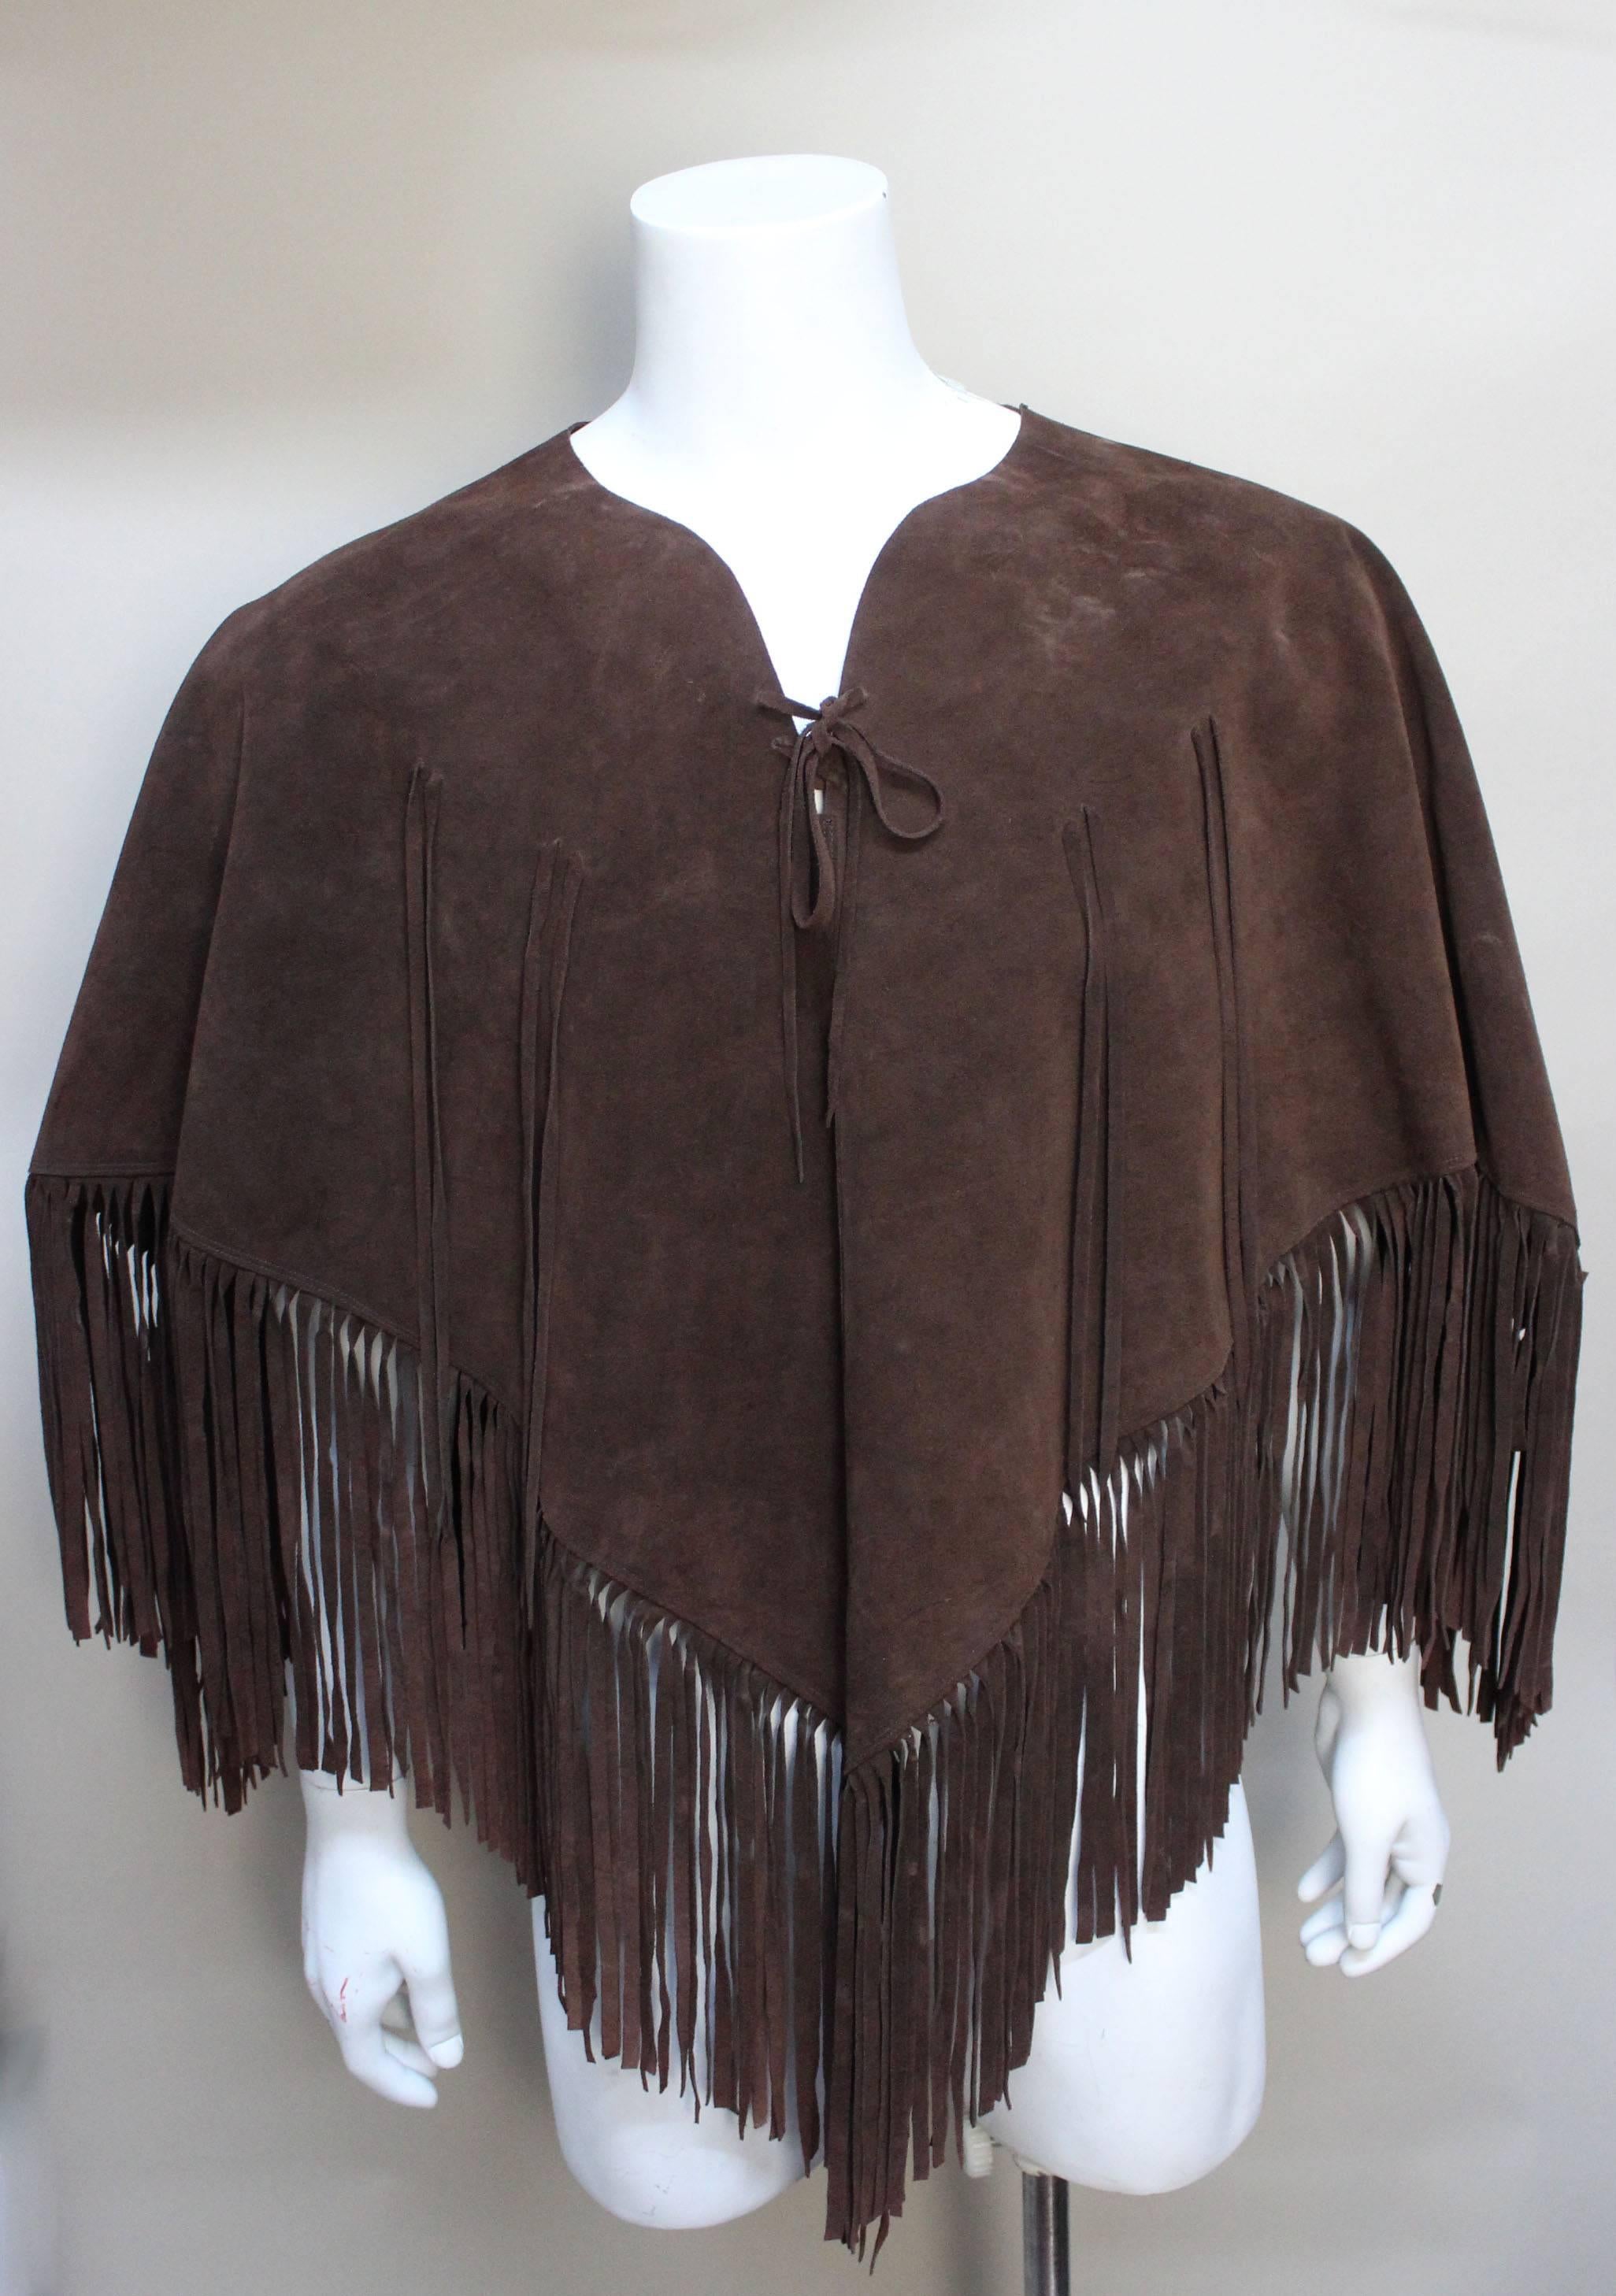 This rich chocolate brown suede poncho is pure 1970's. It is generously fringed and drapes beautifully. A rawhide tie keeps it closed at the neck and it is further embellished with additional fringe on the front. It measures as a 34